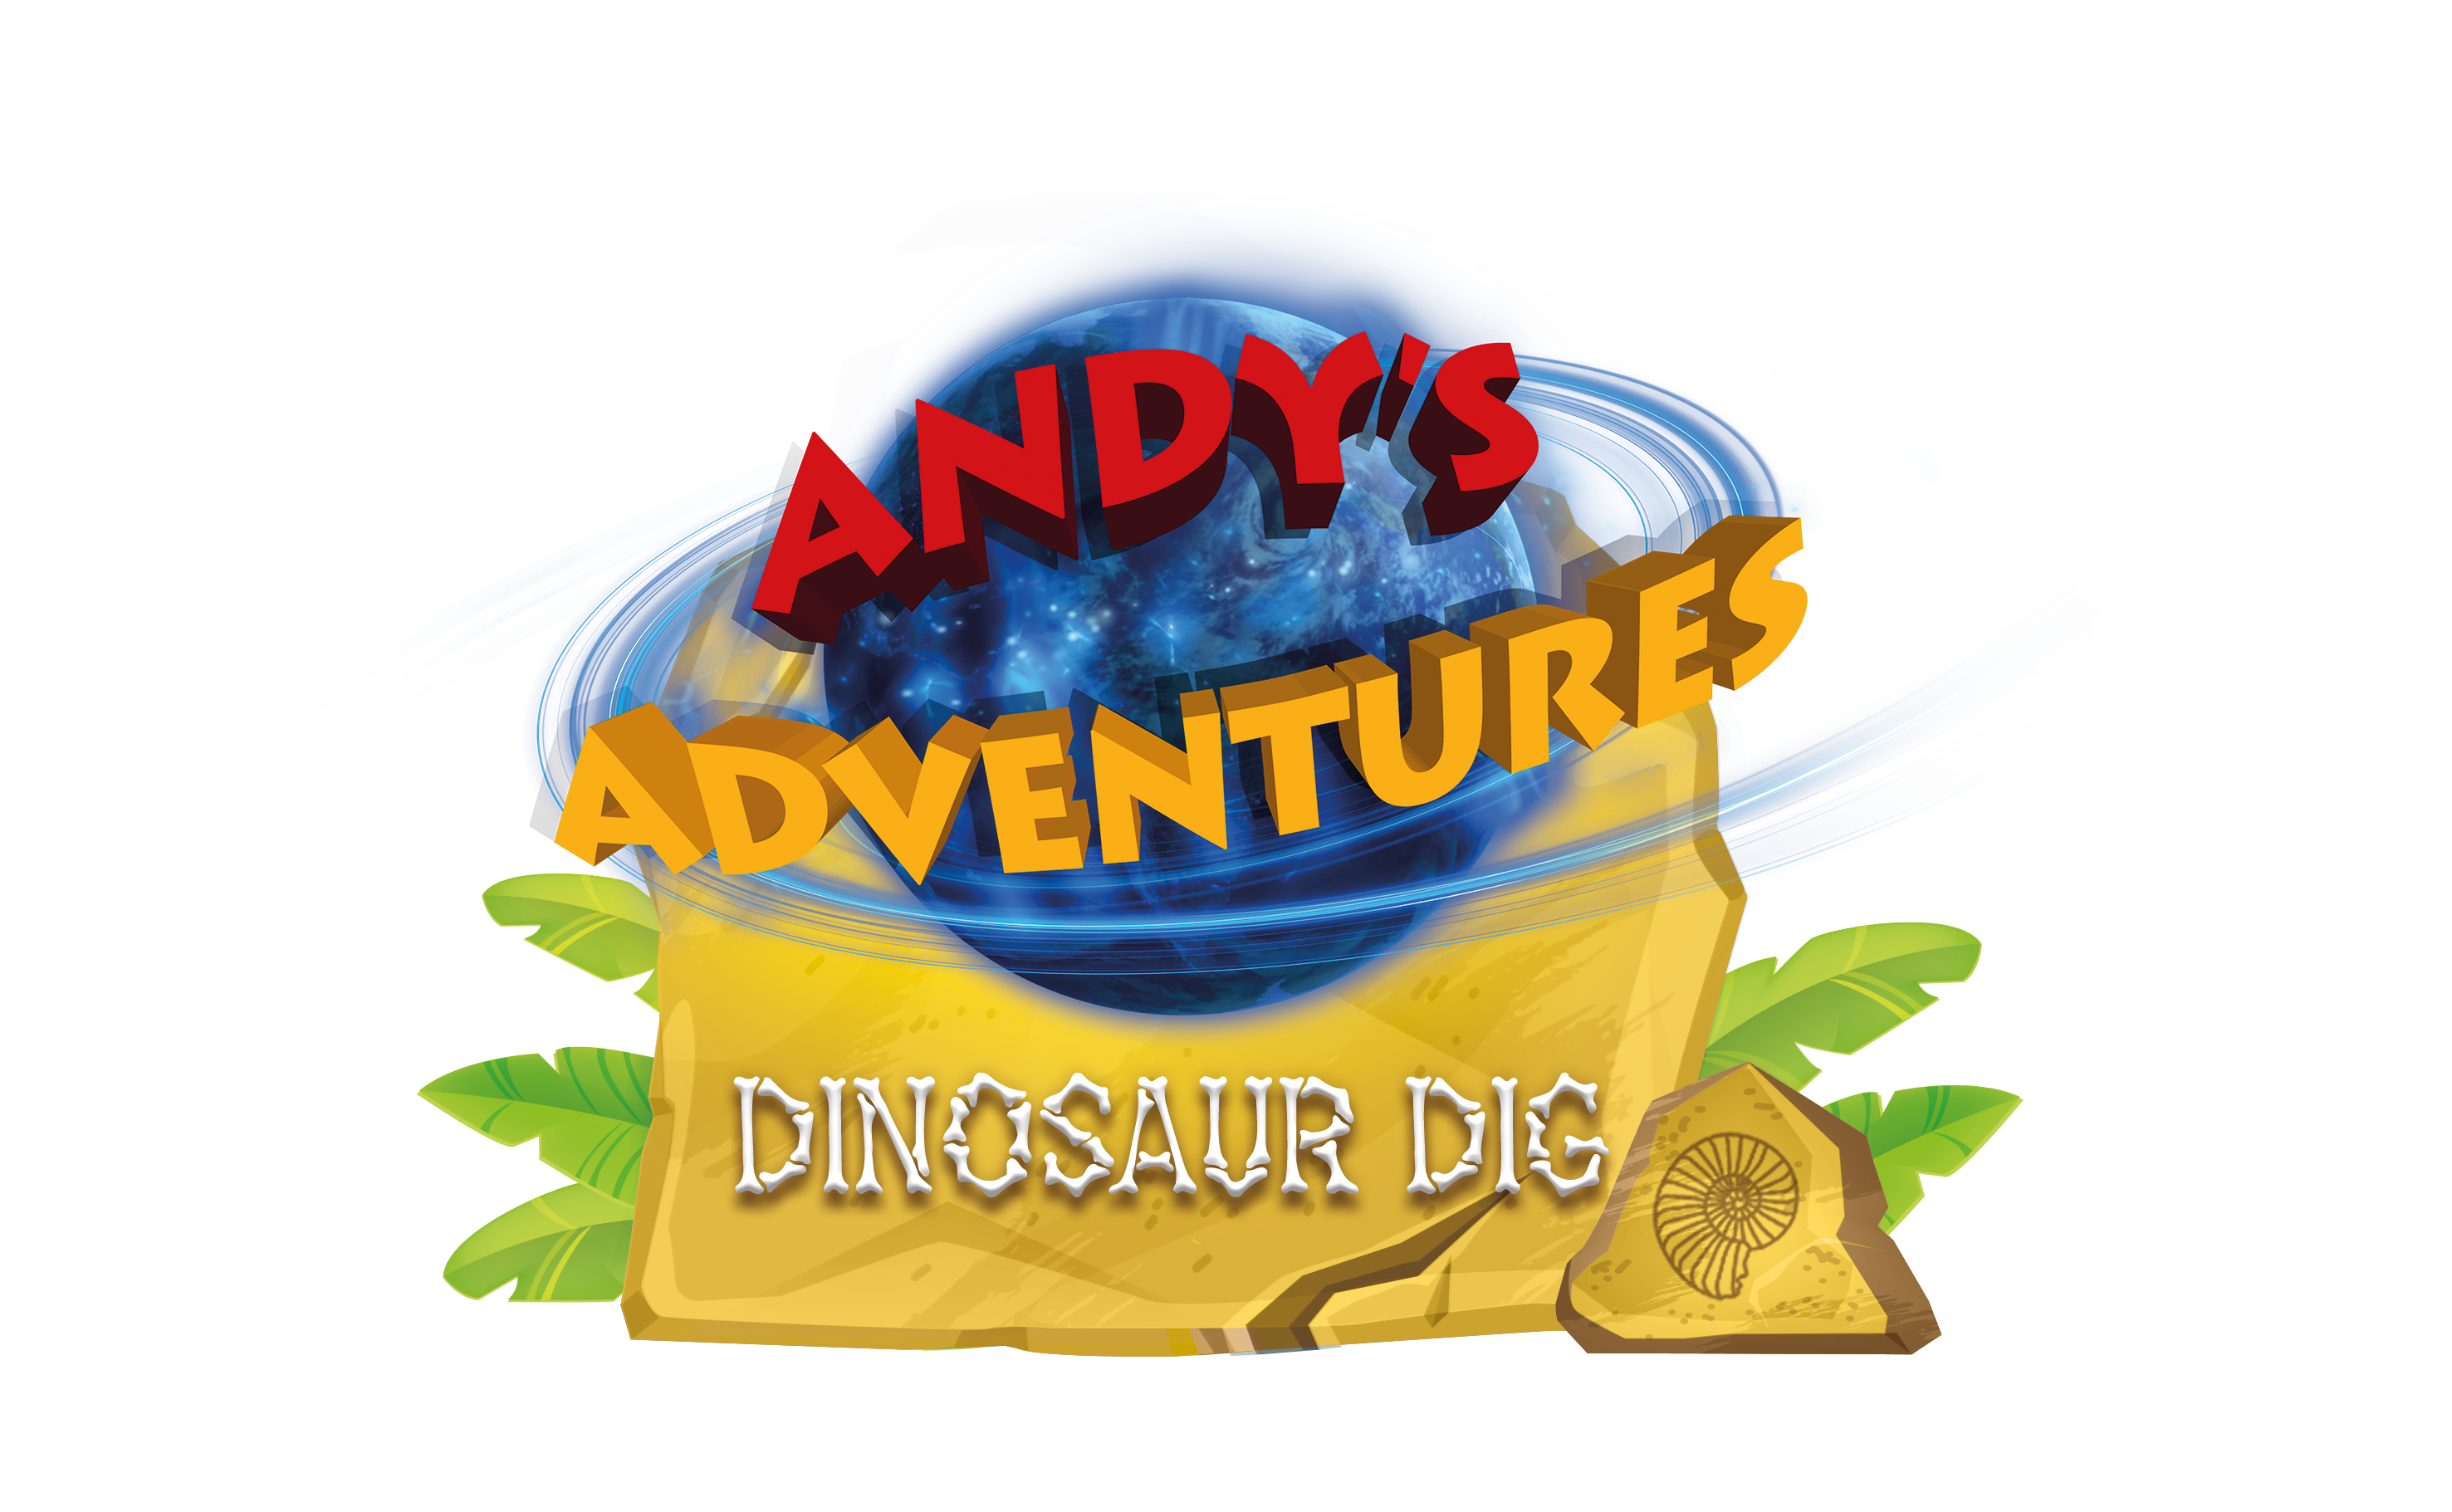 Andy’s Adventures Dinosaur Dig in CBeebies Land at Alton Towers Resort